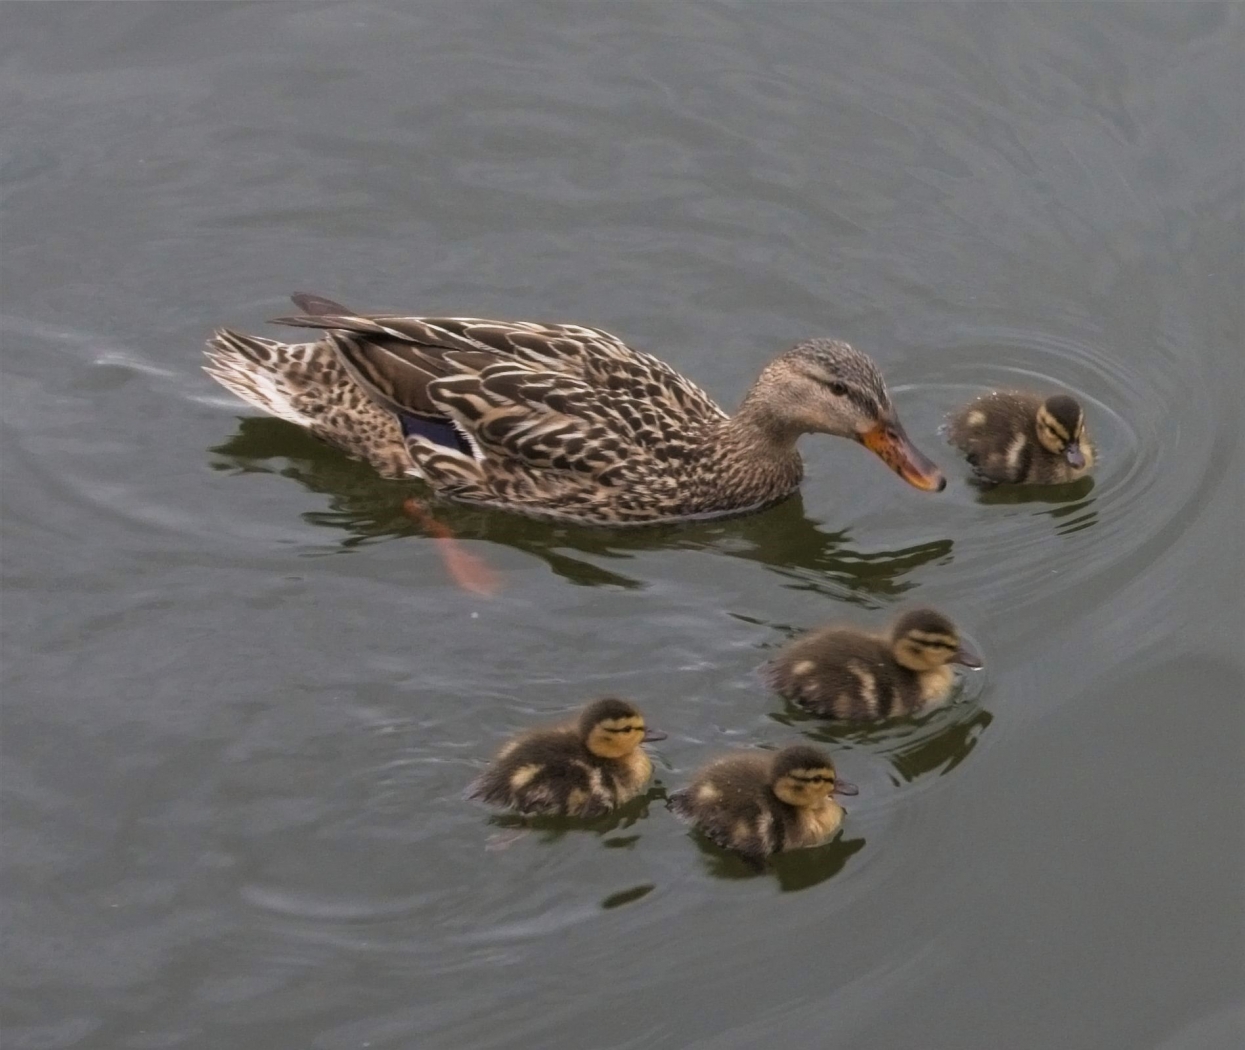 Swimming with Babies by Charles Hall